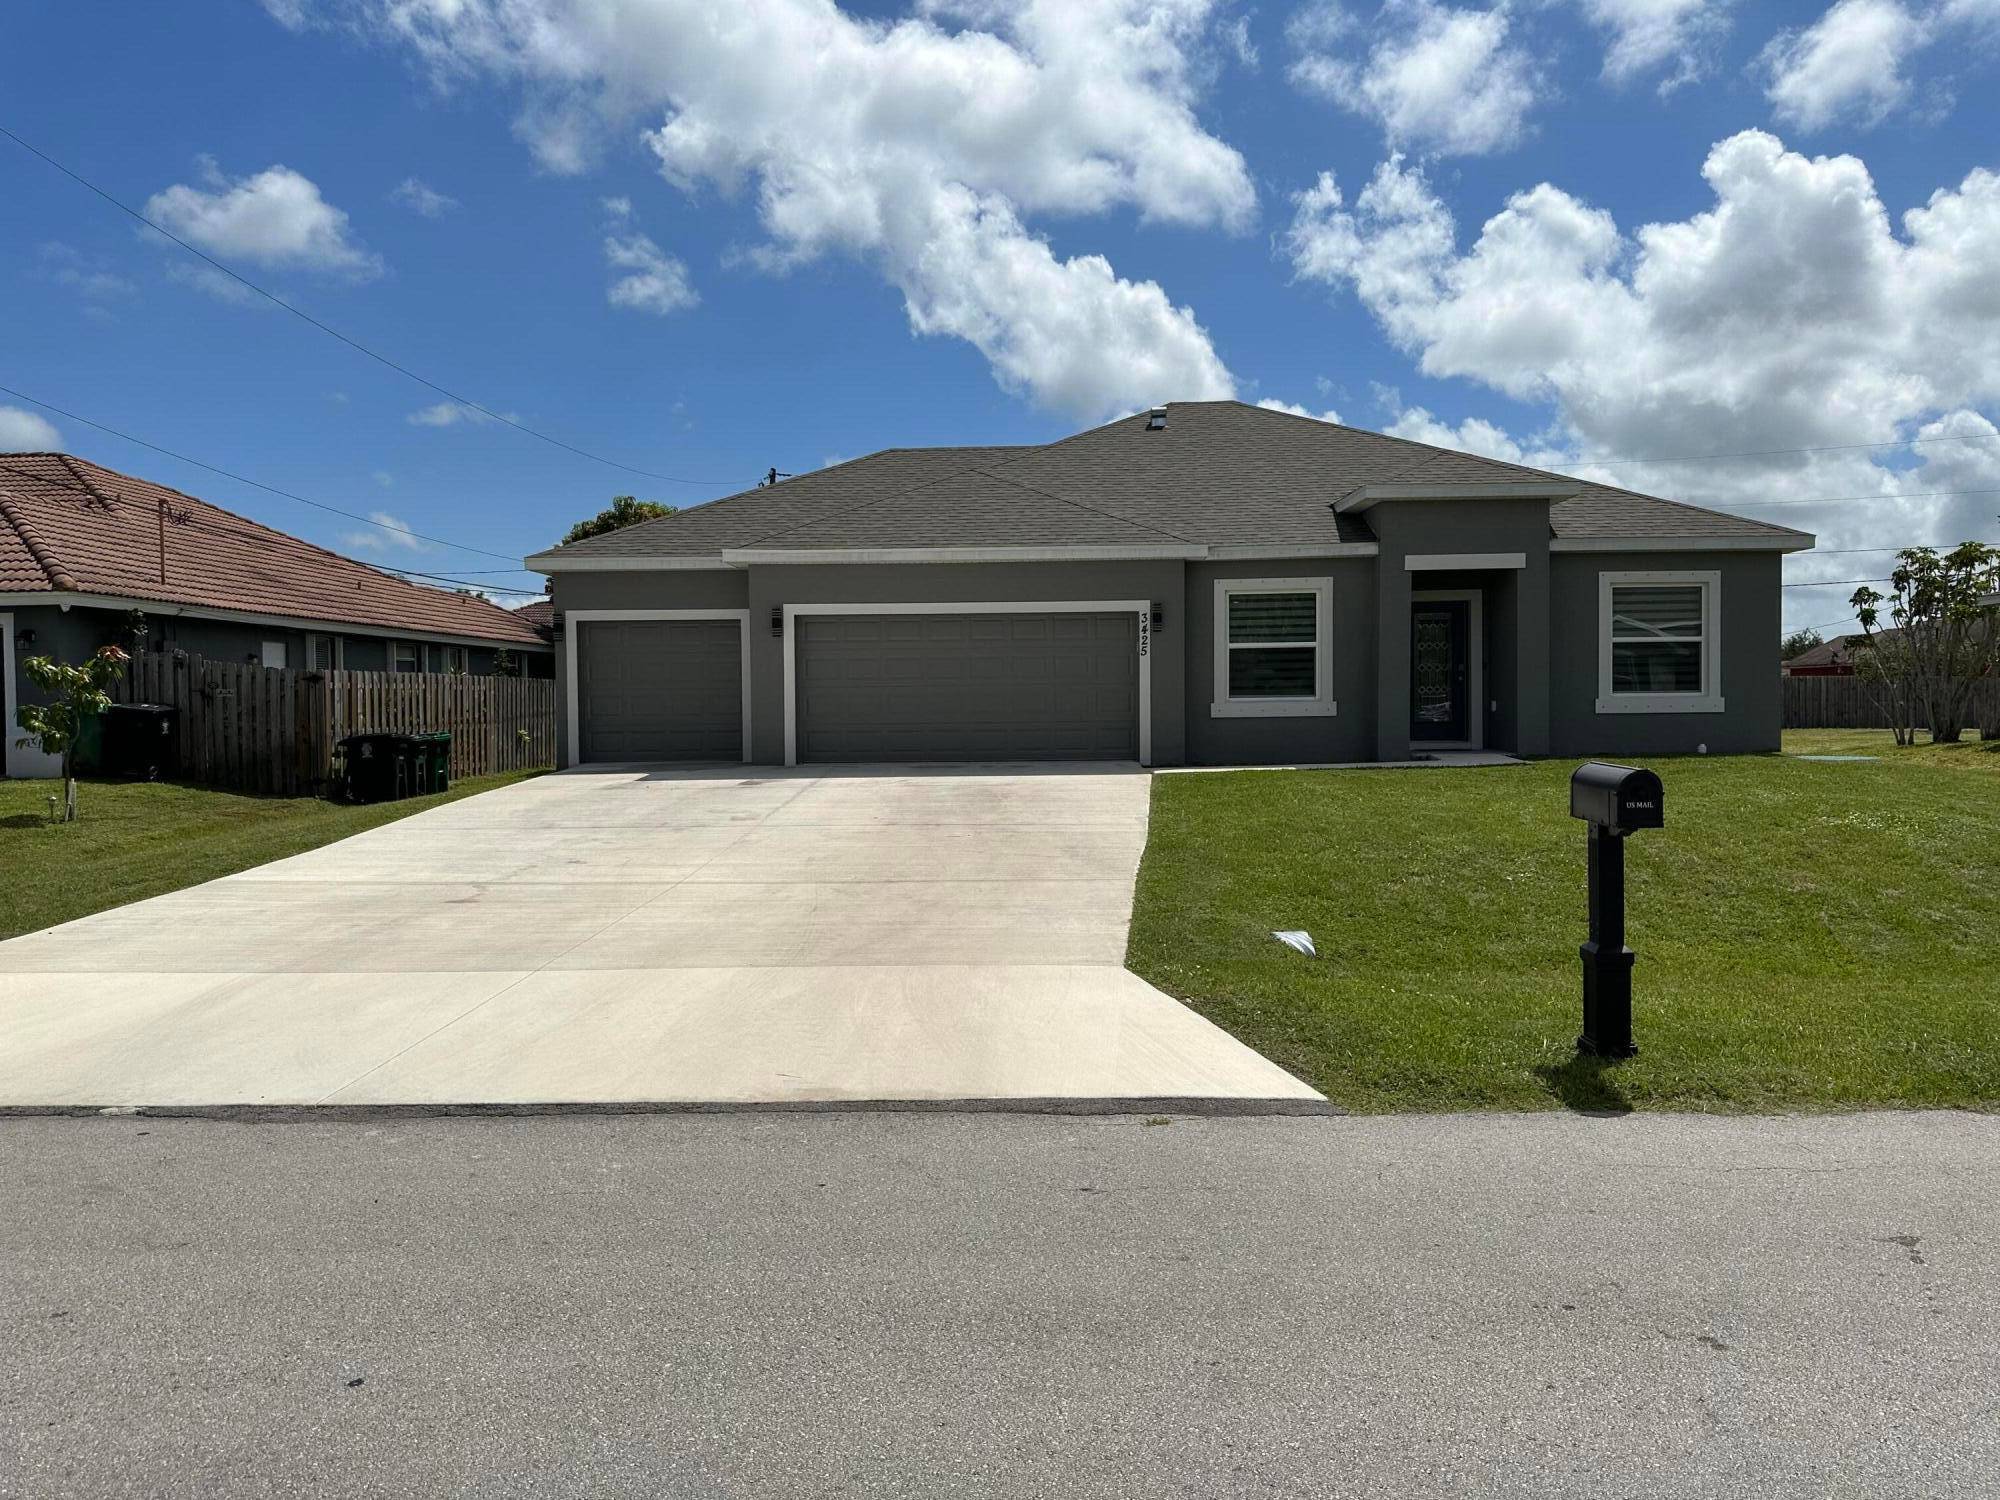 BRAND NEW HOUSE, LOCATION, LOCATION, LOCATION, 20X20 CERAMIC TILE THRU OUT, QUARTZ COUNTERTOPS BATHROOMS, KITCHEN, 42''CABINETS, LED LIGHTS THRU OUT, IMPACT DOORS, STAINLESS STEEL APPLIANCES, 3 CAR GARAGE, 1 EXTENDED ...